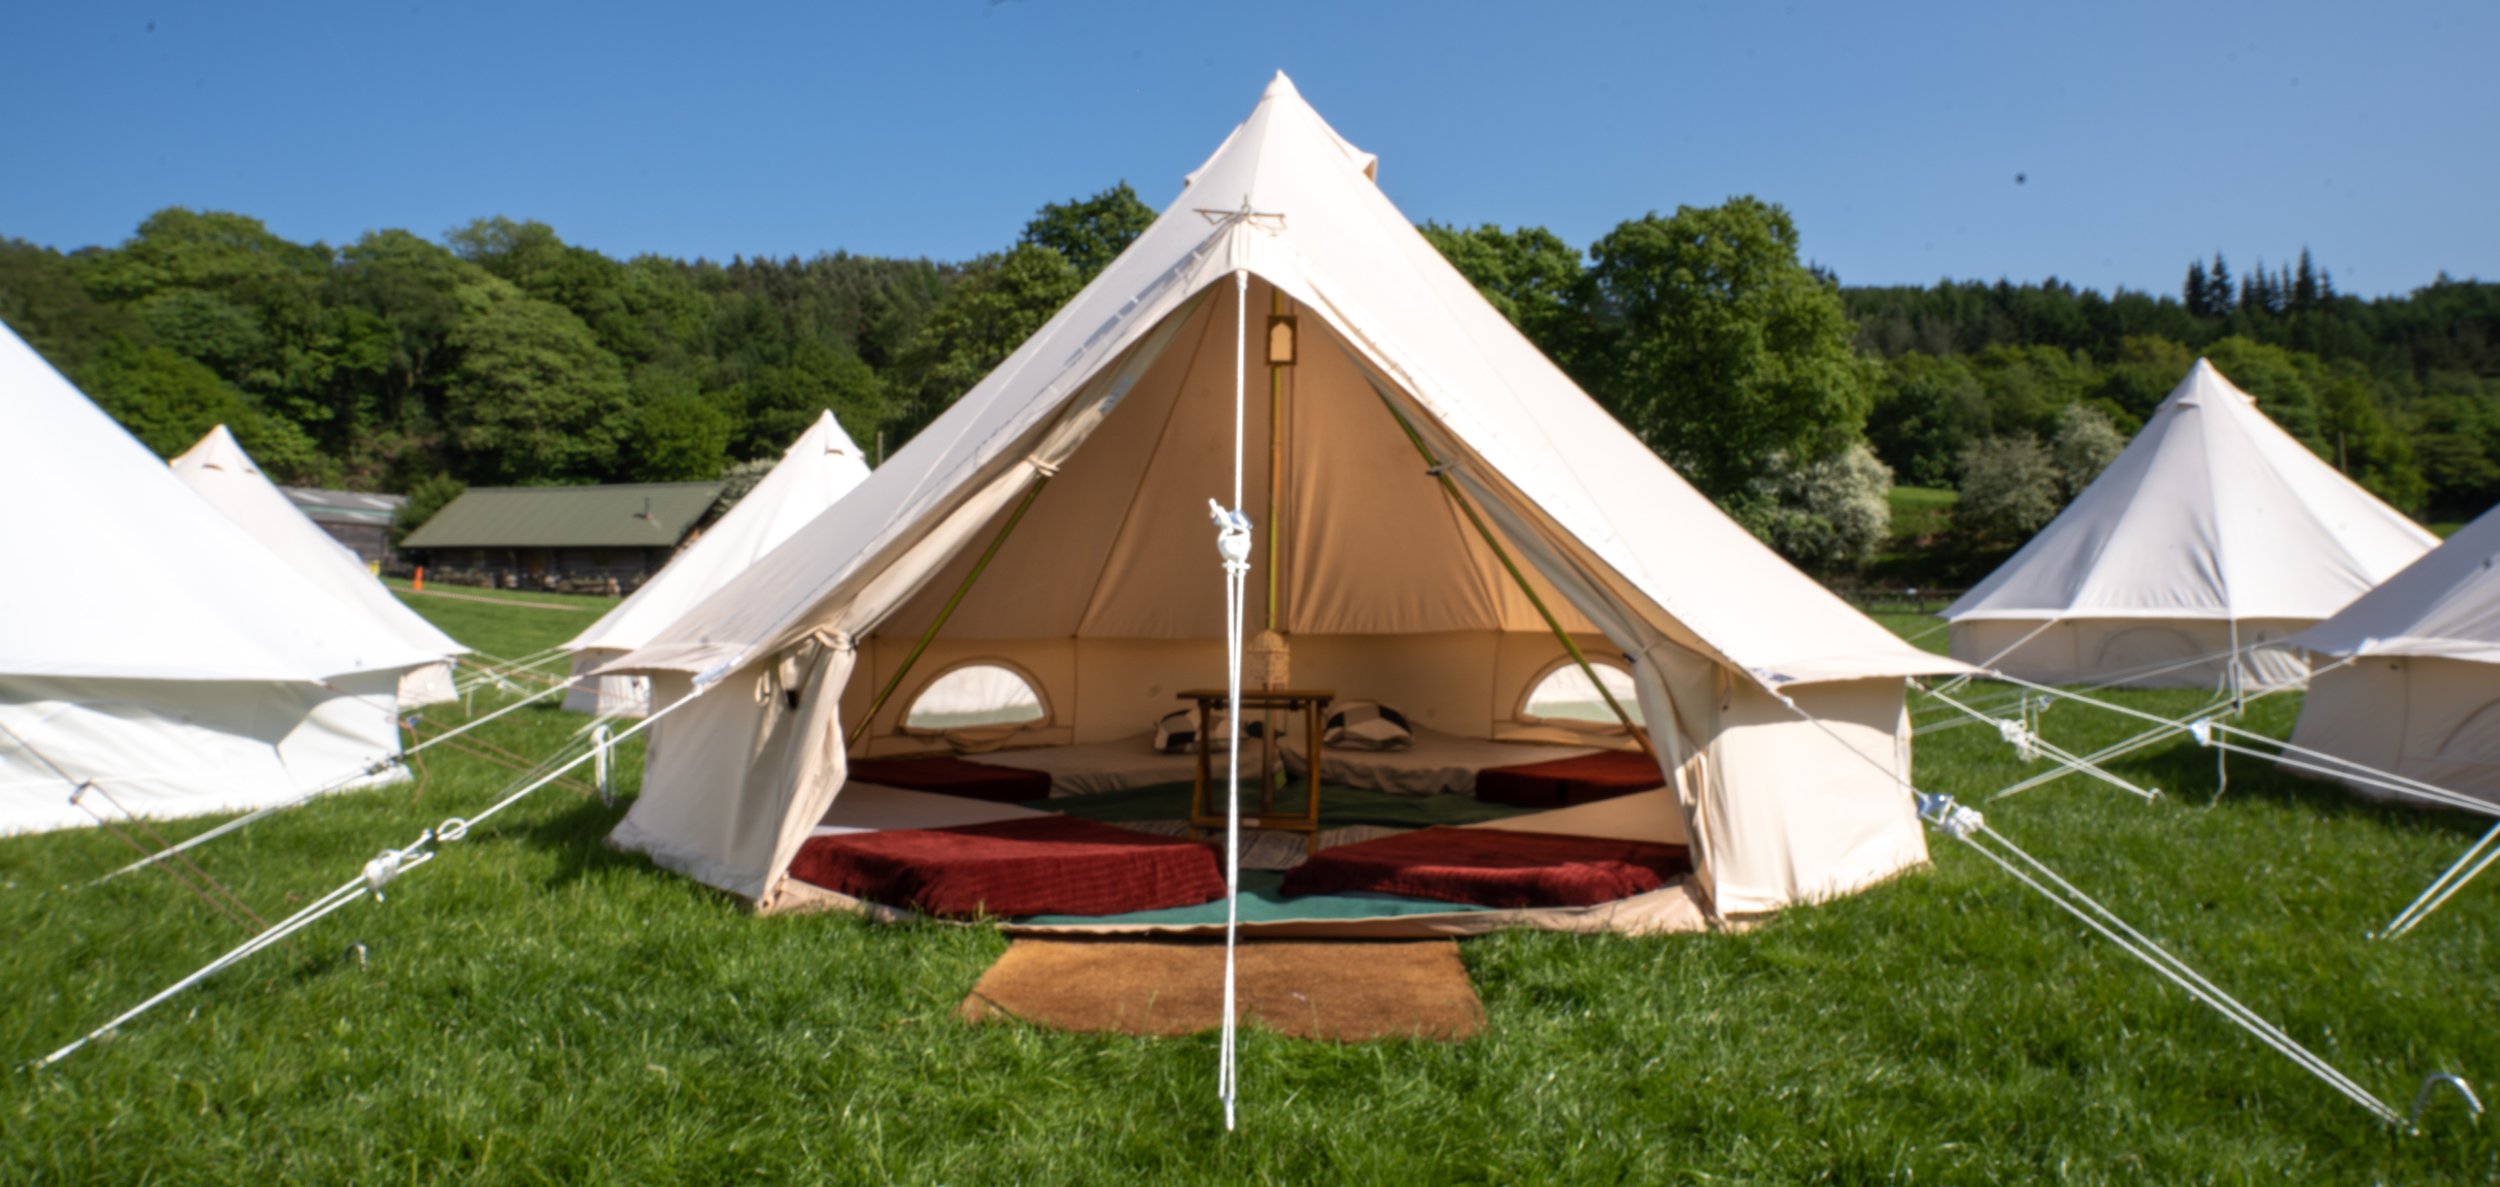 Classic bell tent exterior at whitebottom.jpeg